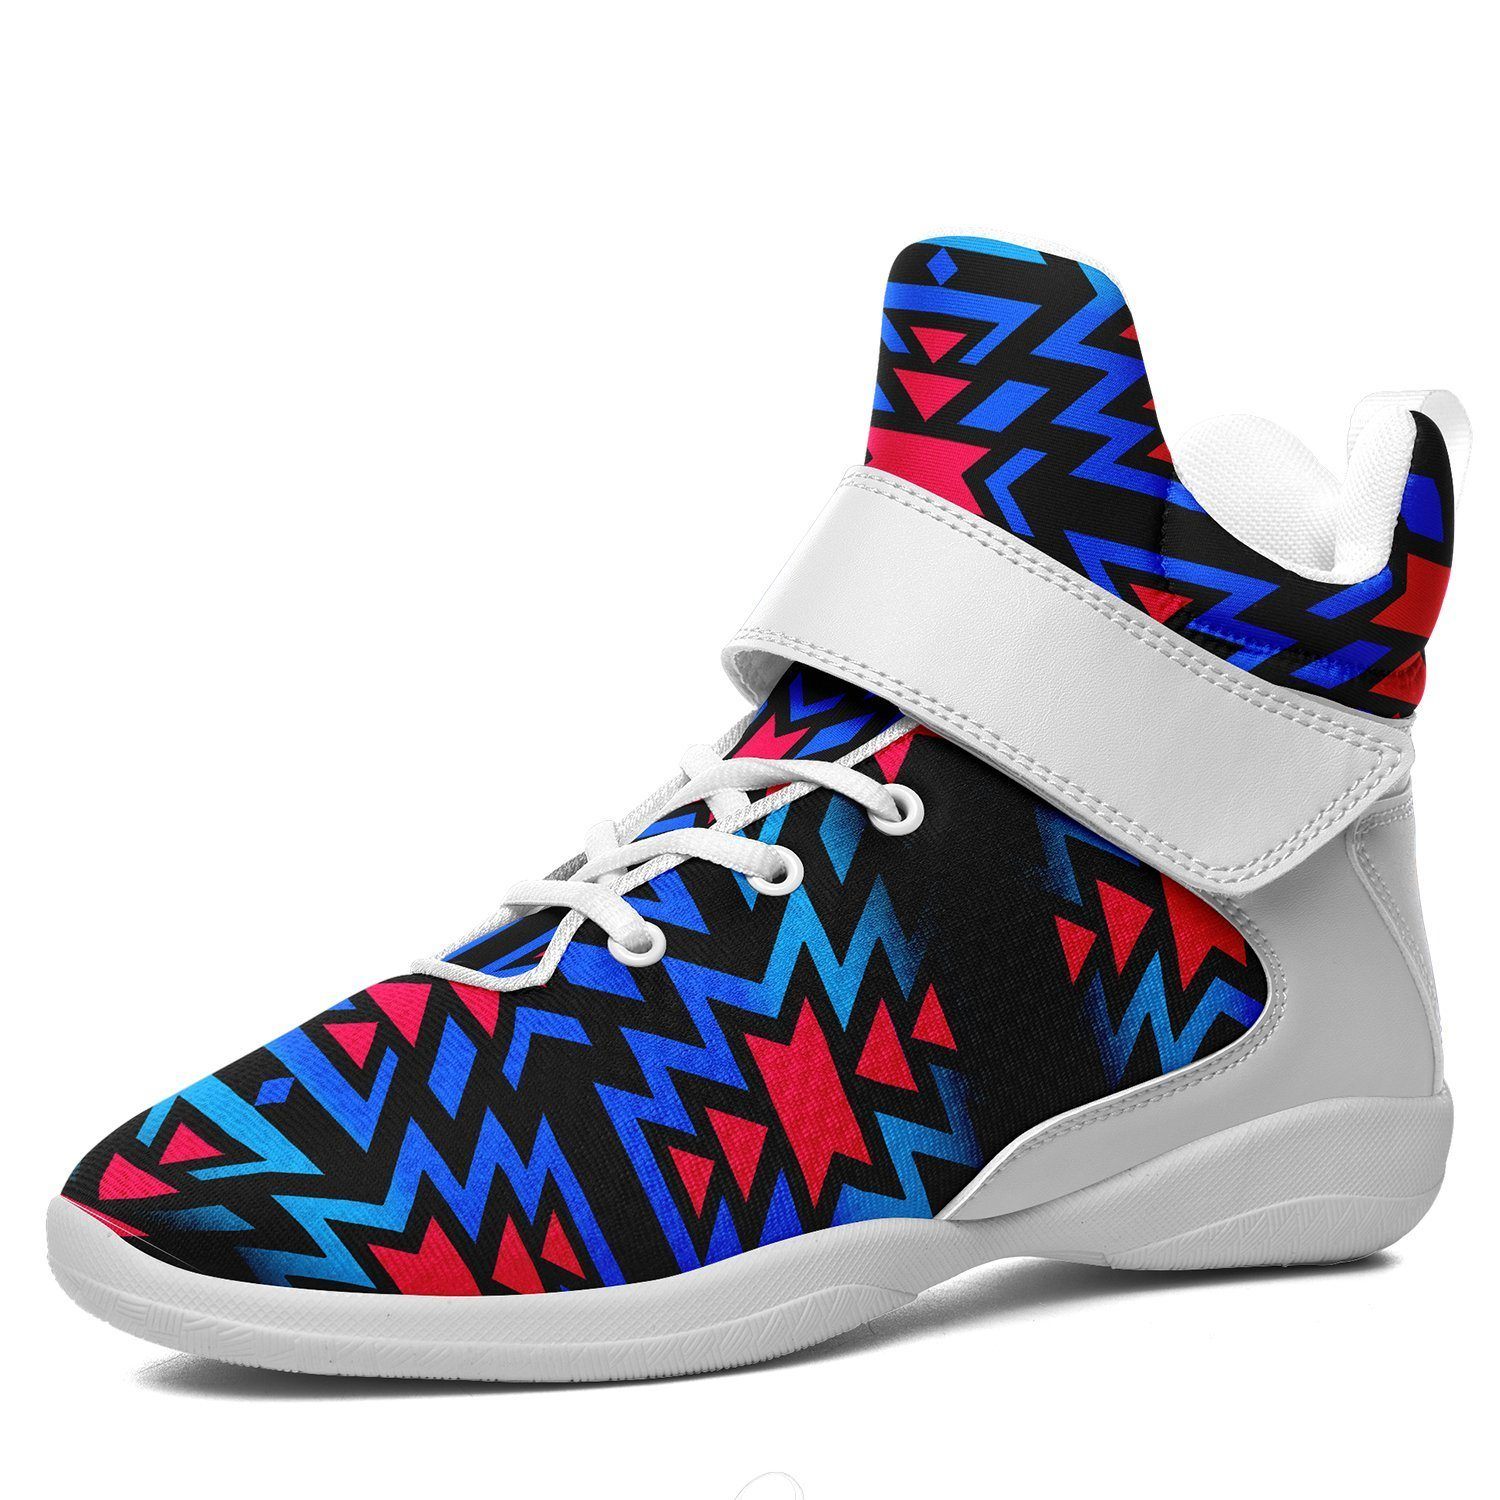 Black Fire Dragonfly Ipottaa Basketball / Sport High Top Shoes - White Sole 49 Dzine US Men 7 / EUR 40 White Sole with White Strap 